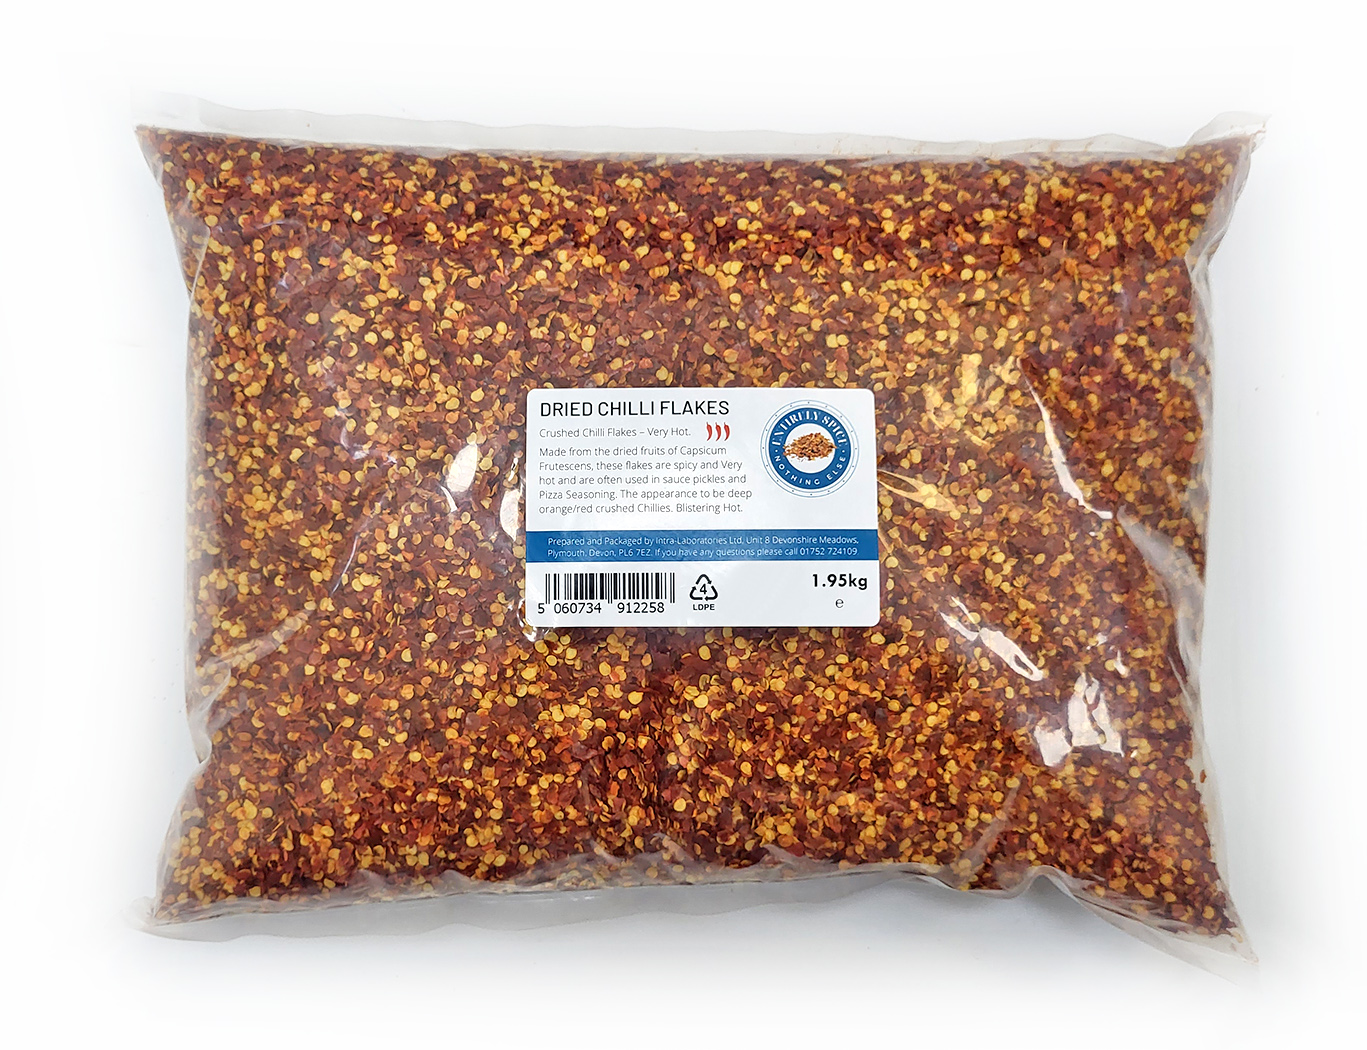 Dried Chilli Flakes 1.95Kg